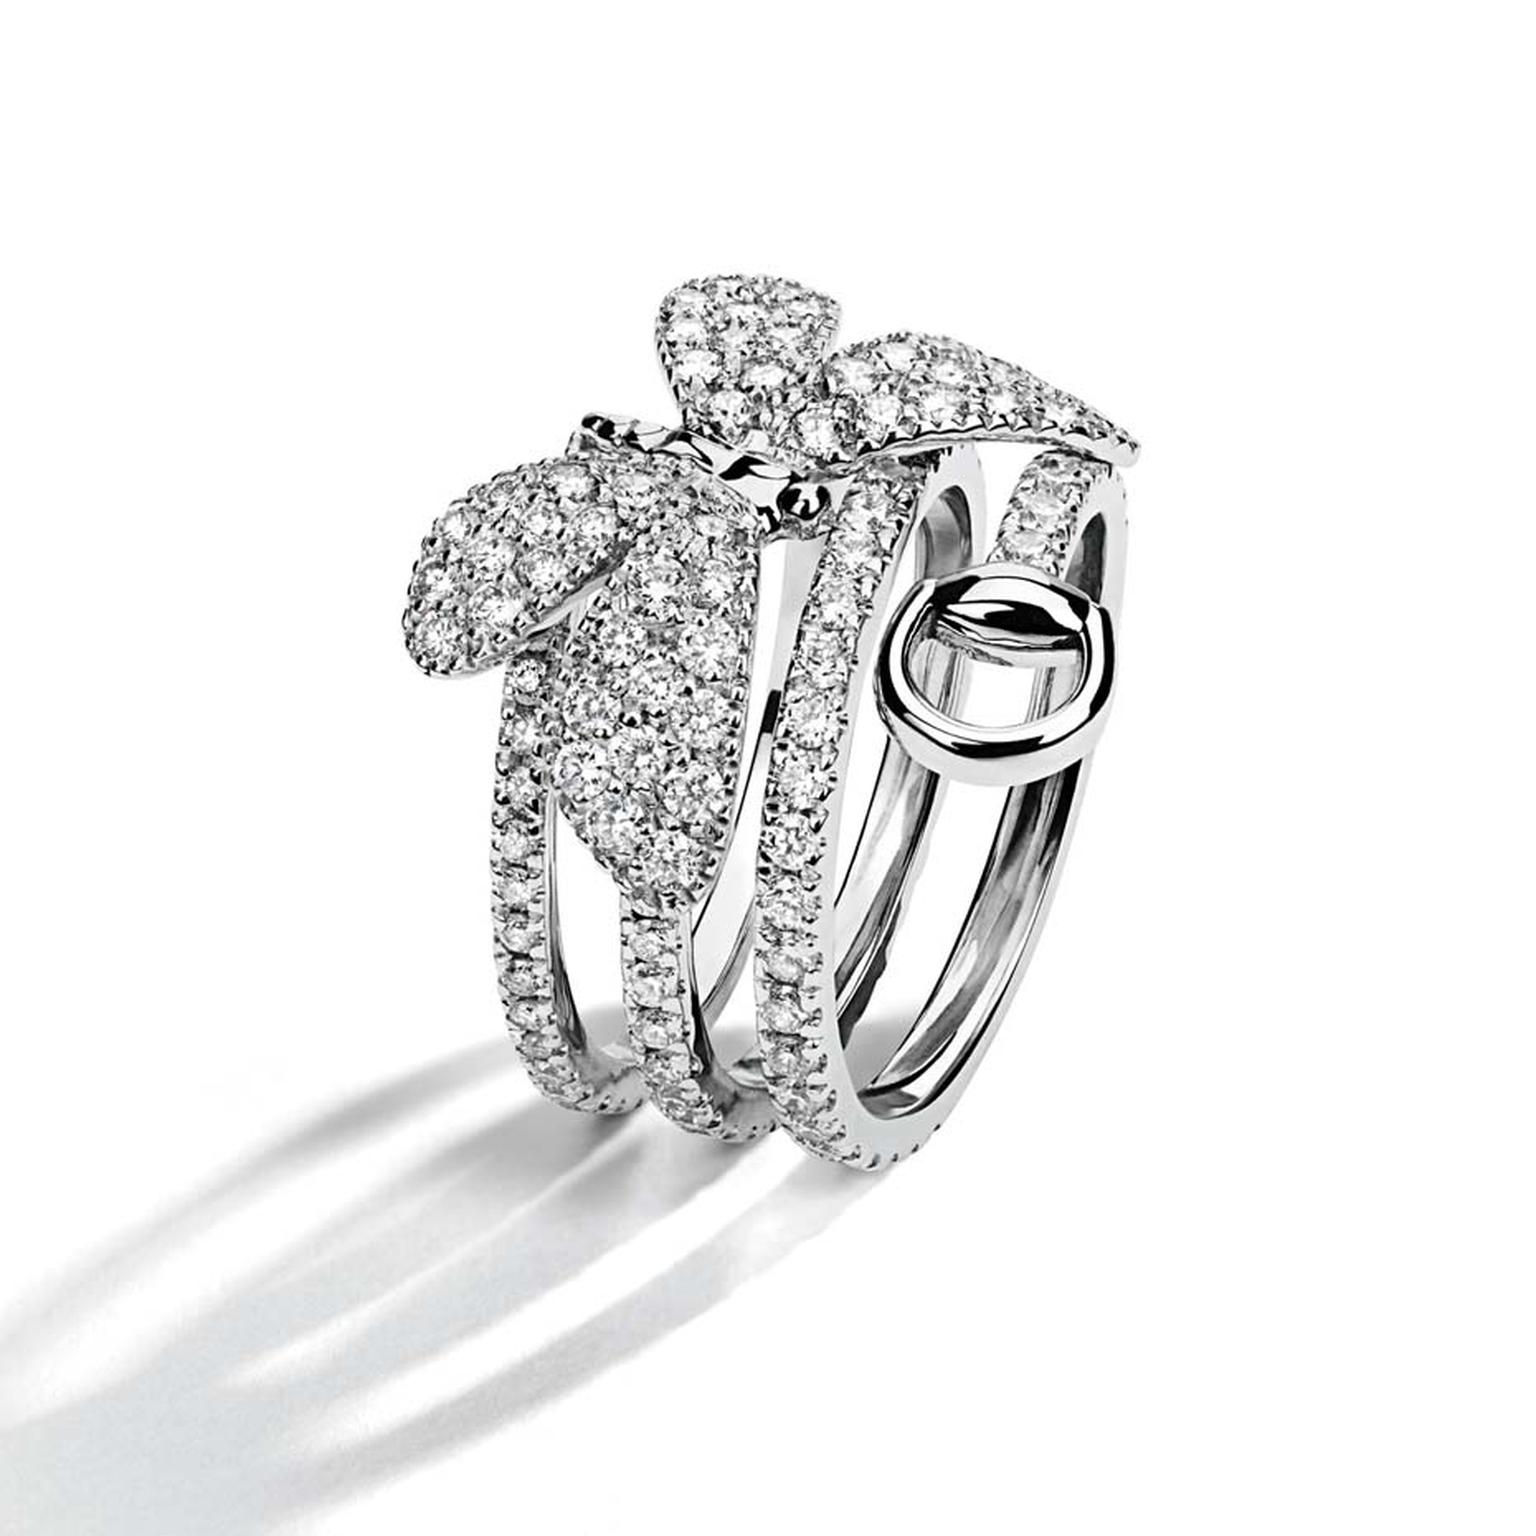 Butterfly jewellery_Basel_Gucci_White gold and diamond Butterfly spiral ring.jpg